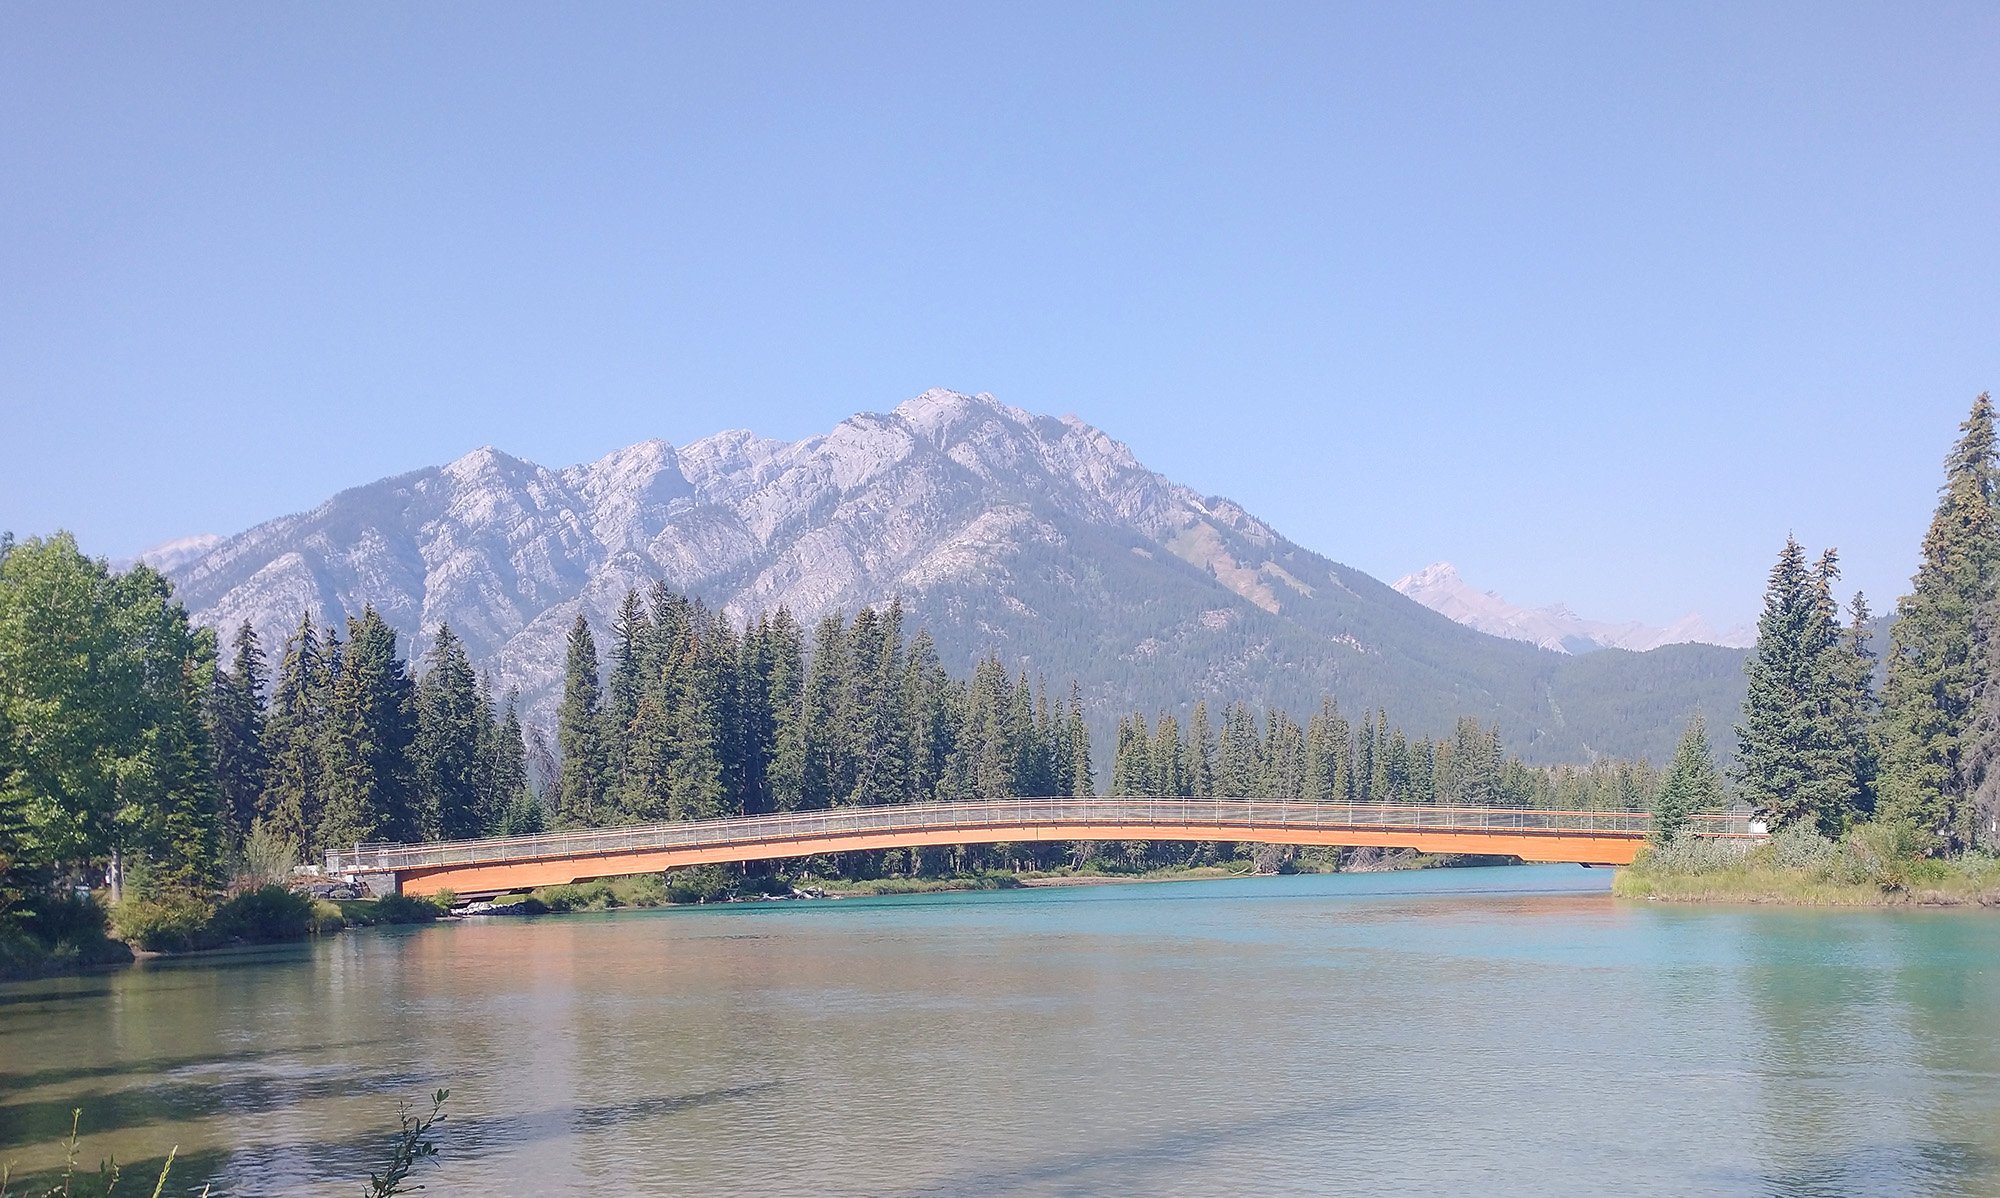 Making my way to some a little canyon. You follow the typical green rivers of Jasper / Banff.